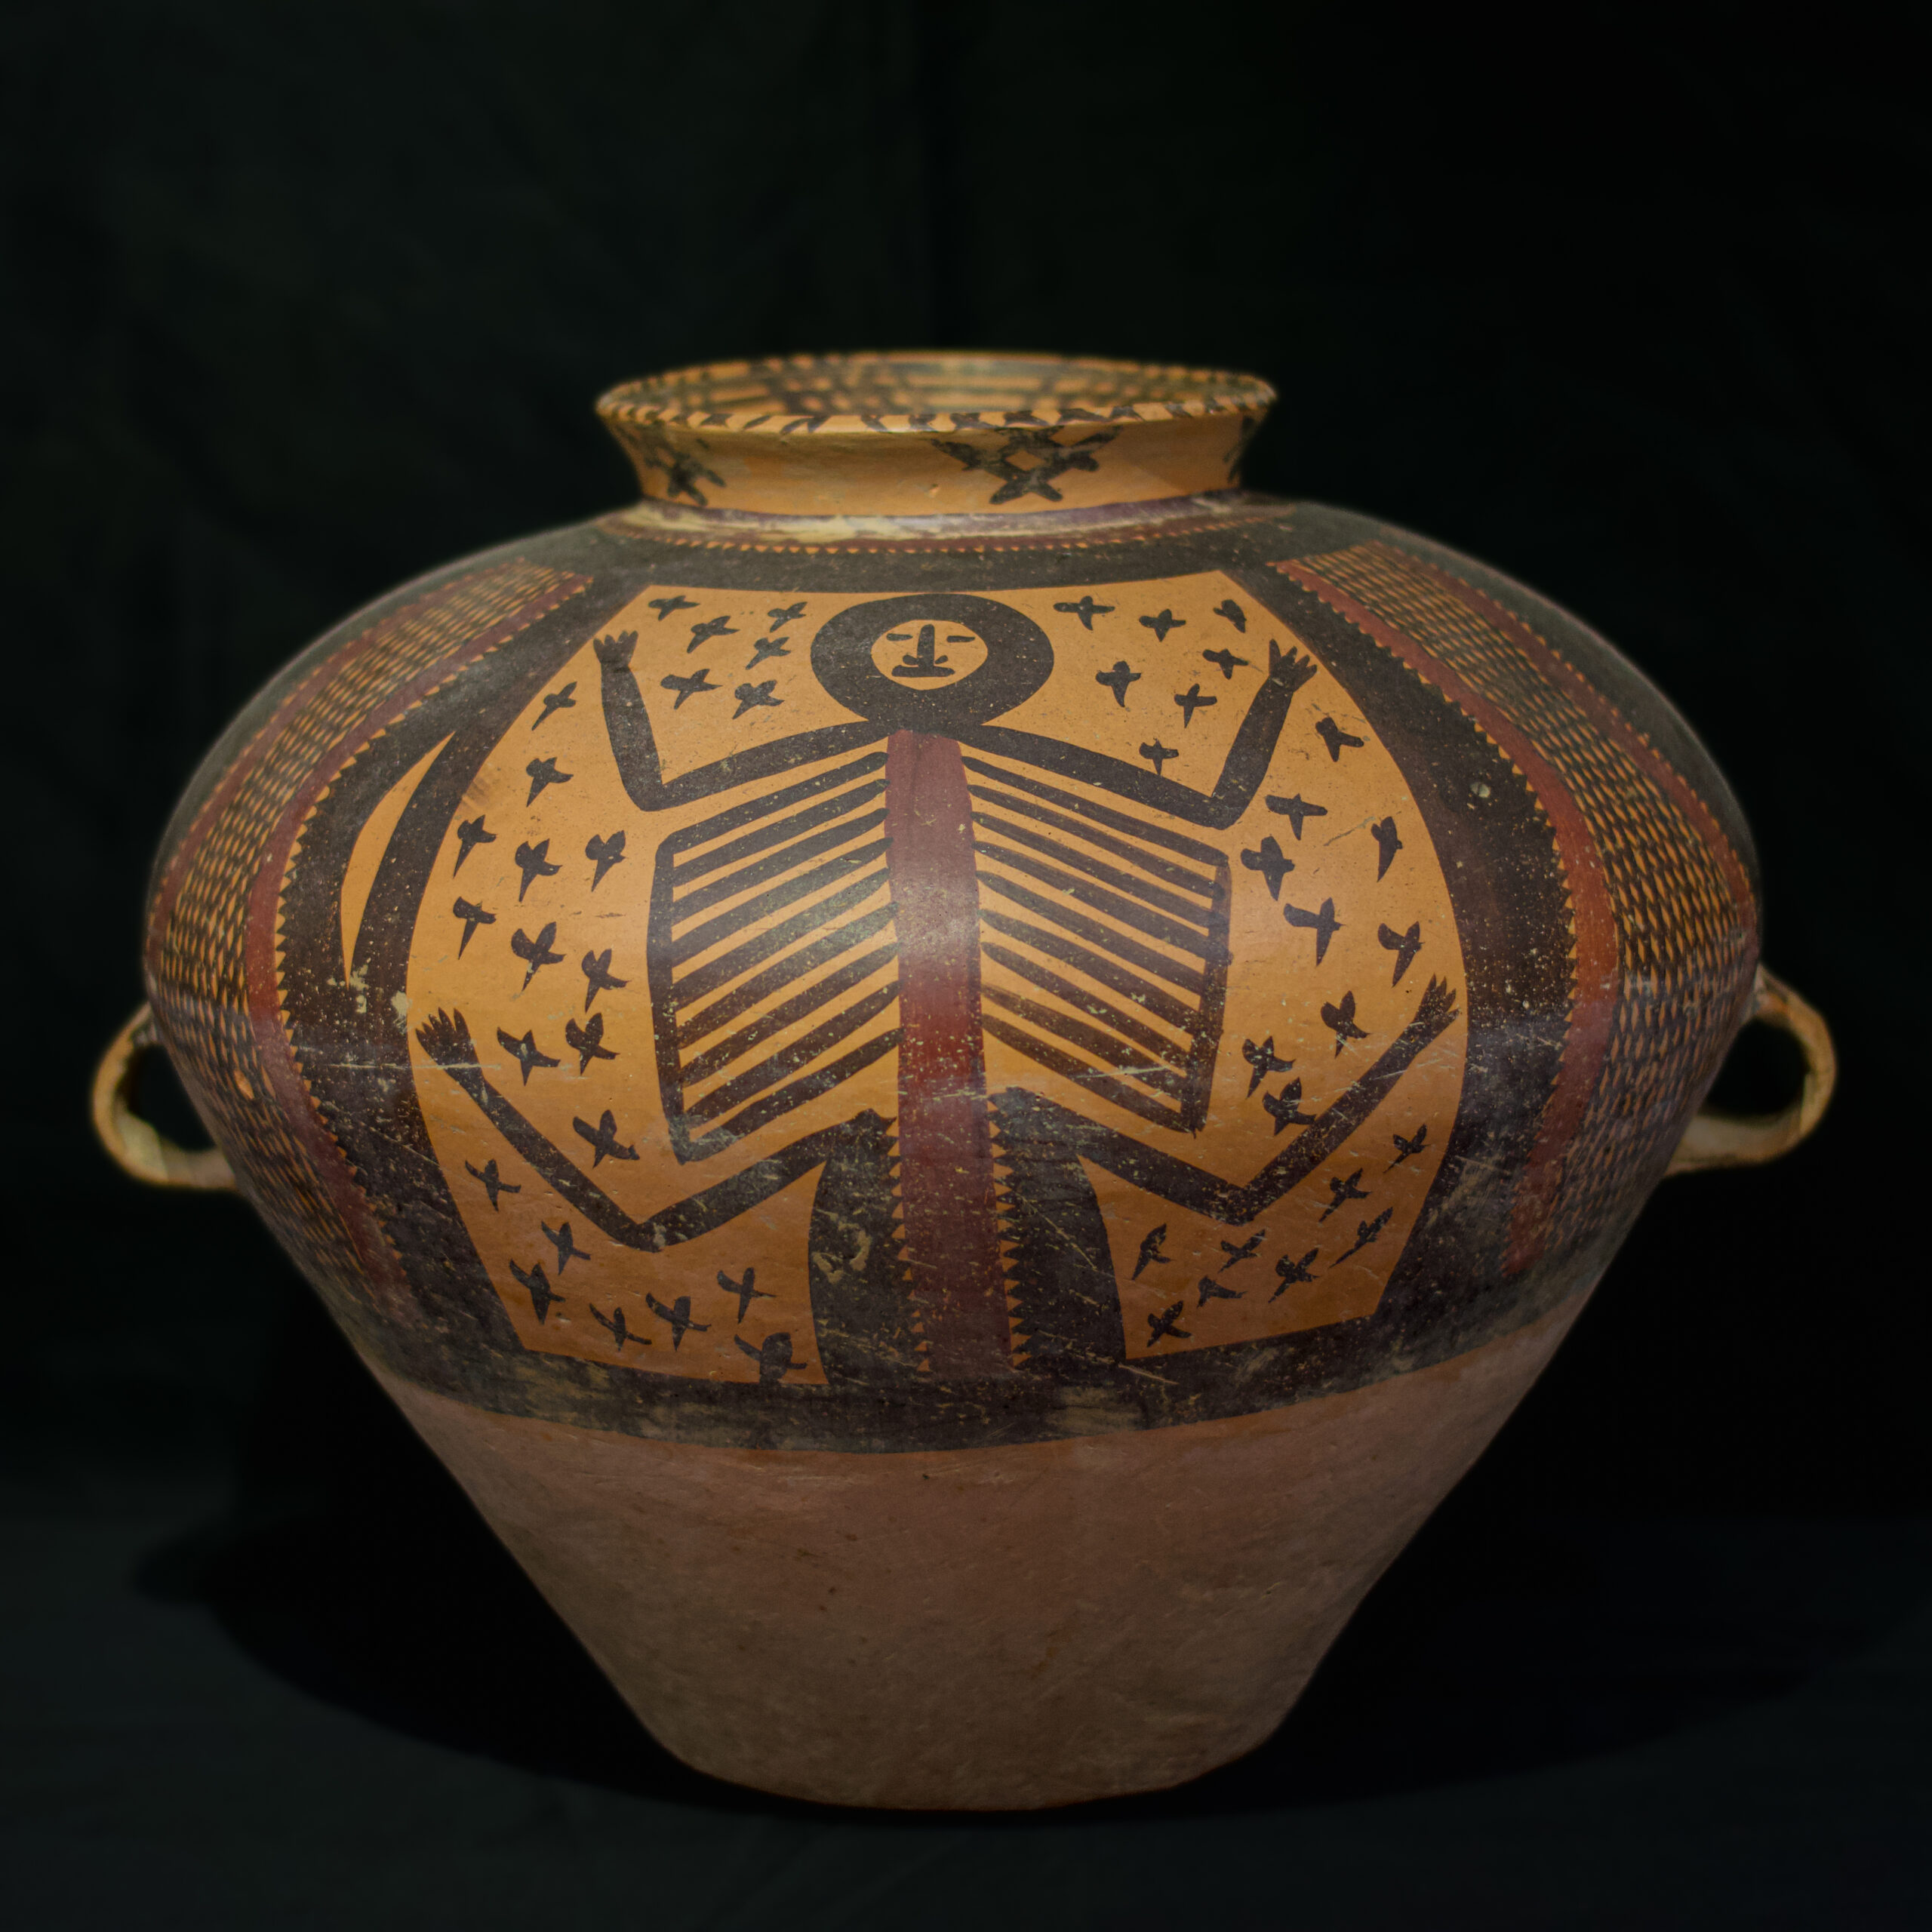 Large painted pottery with abstract human figure, Majiayao culture, Banshan type, mid3-rd millennium BCE